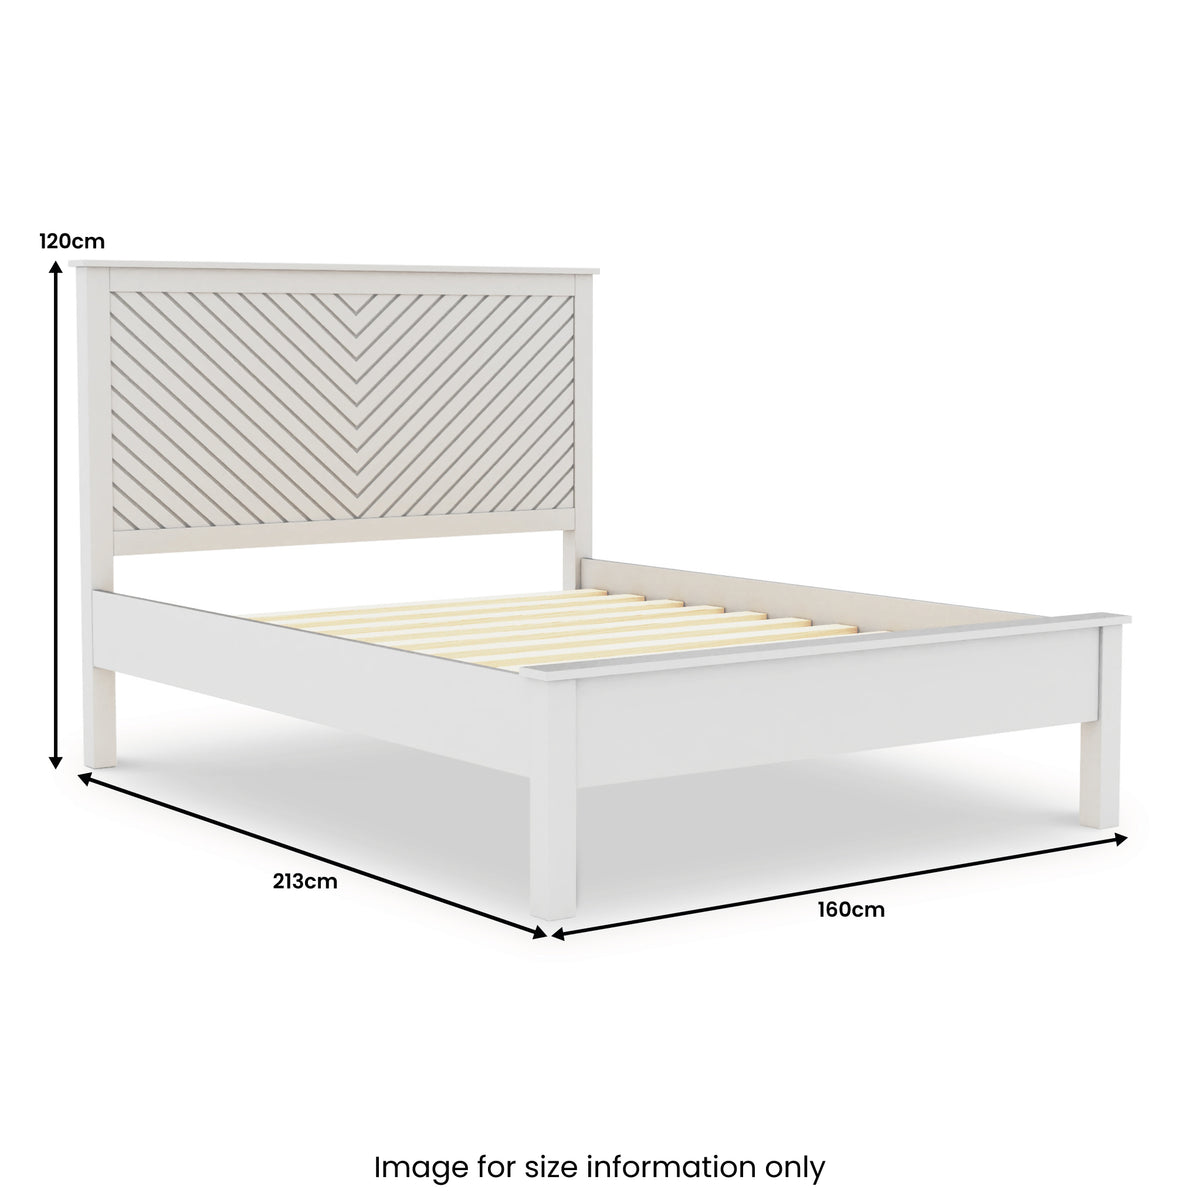 Wotton Chevron Bed Frame - kind size dimensions